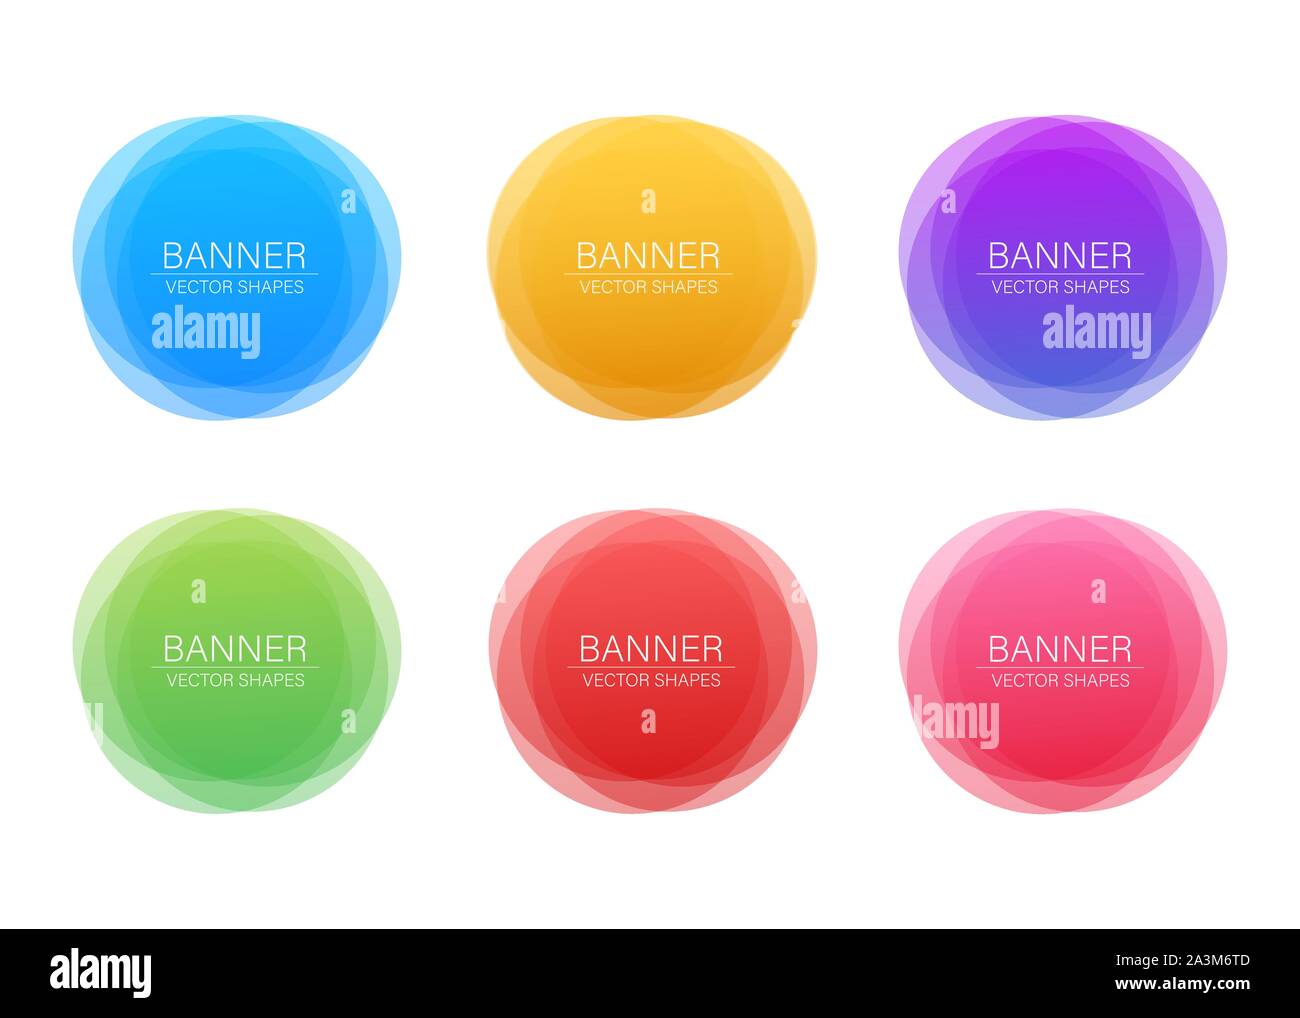 Set of round colorful vector shapes. Abstract vector banners. Vector stock illustration. Stock Vector